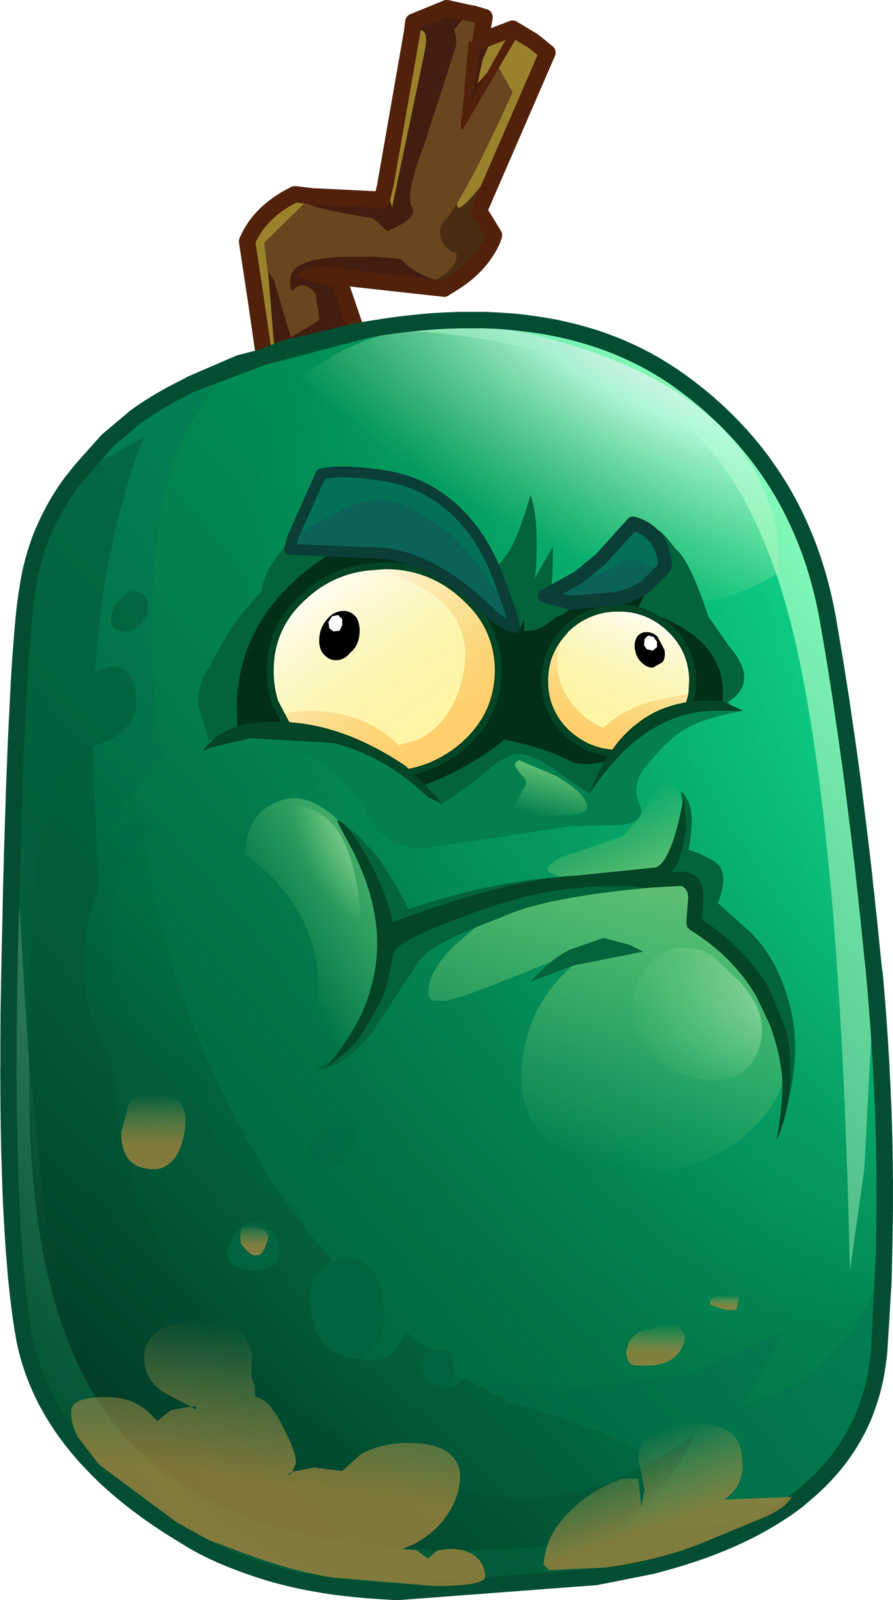 Its About Time Cartoon Winter Melon Punch Wax Gourd - Plants Vs Zombies Winter Melon (893x1600)